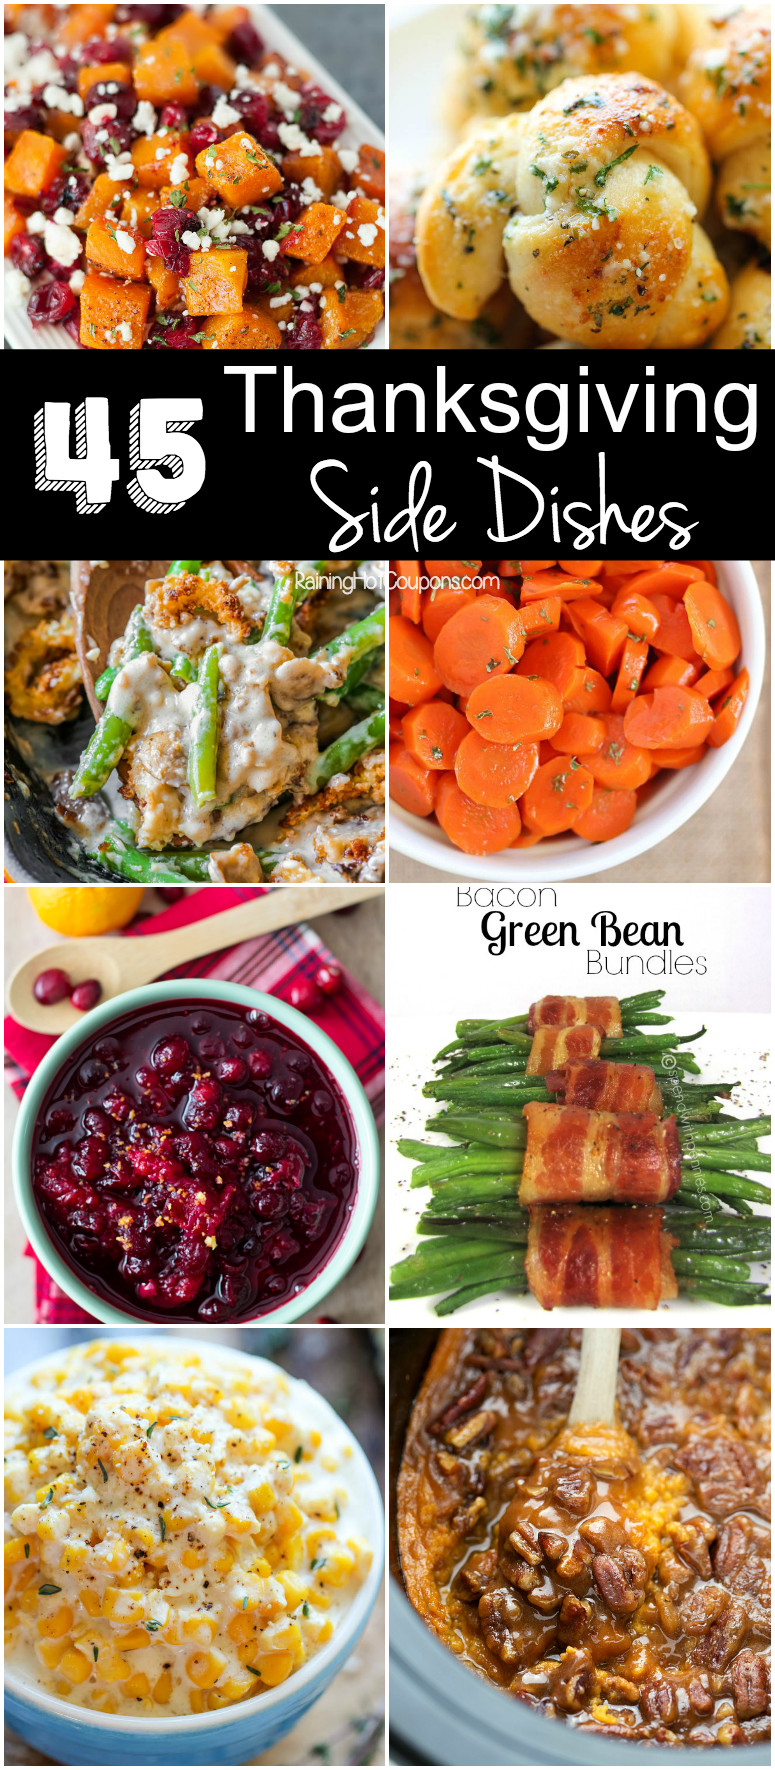 Best Thanksgiving Side Dishes
 45 Thanksgiving Side Dishes